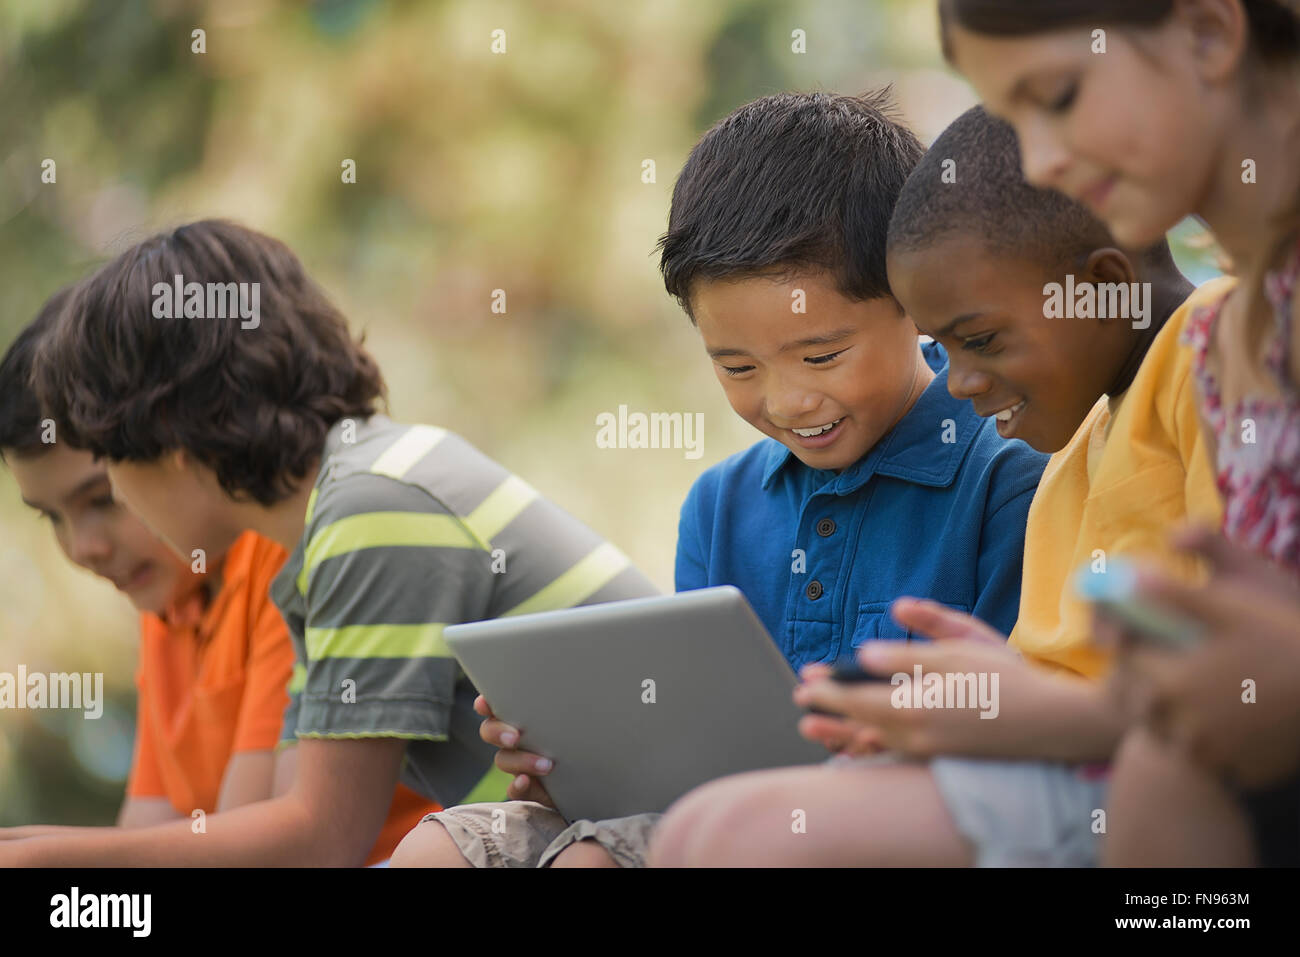 A row of children sitting outdoors in summer using tablets and handheld games. Stock Photo